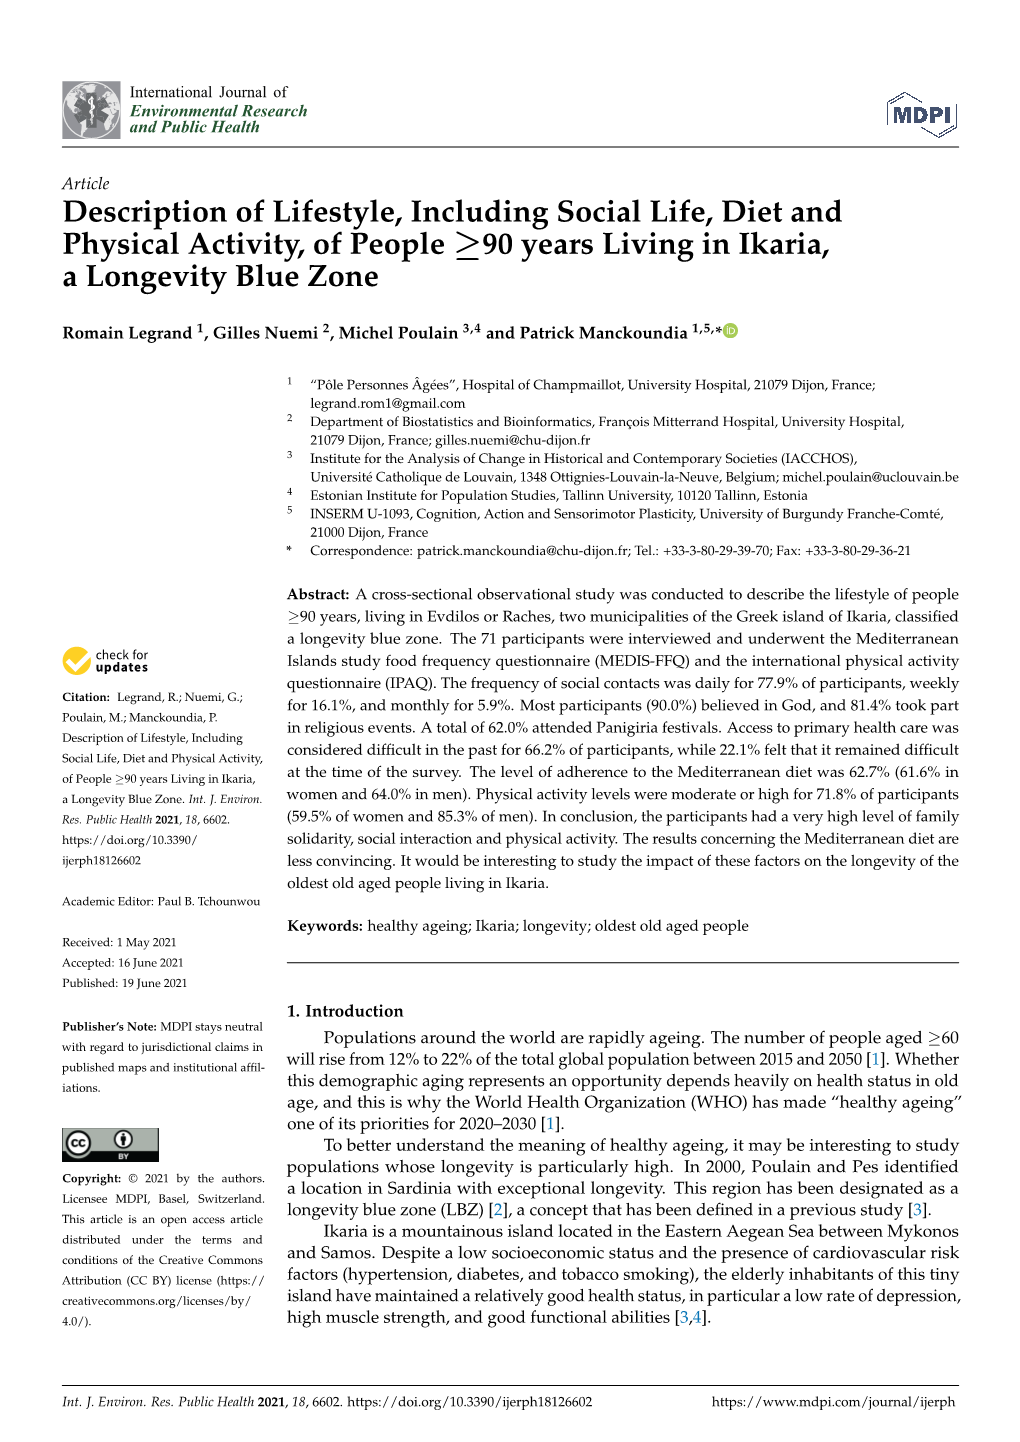 Description of Lifestyle, Including Social Life, Diet and Physical Activity, of People ≥90 Years Living in Ikaria, a Longevity Blue Zone